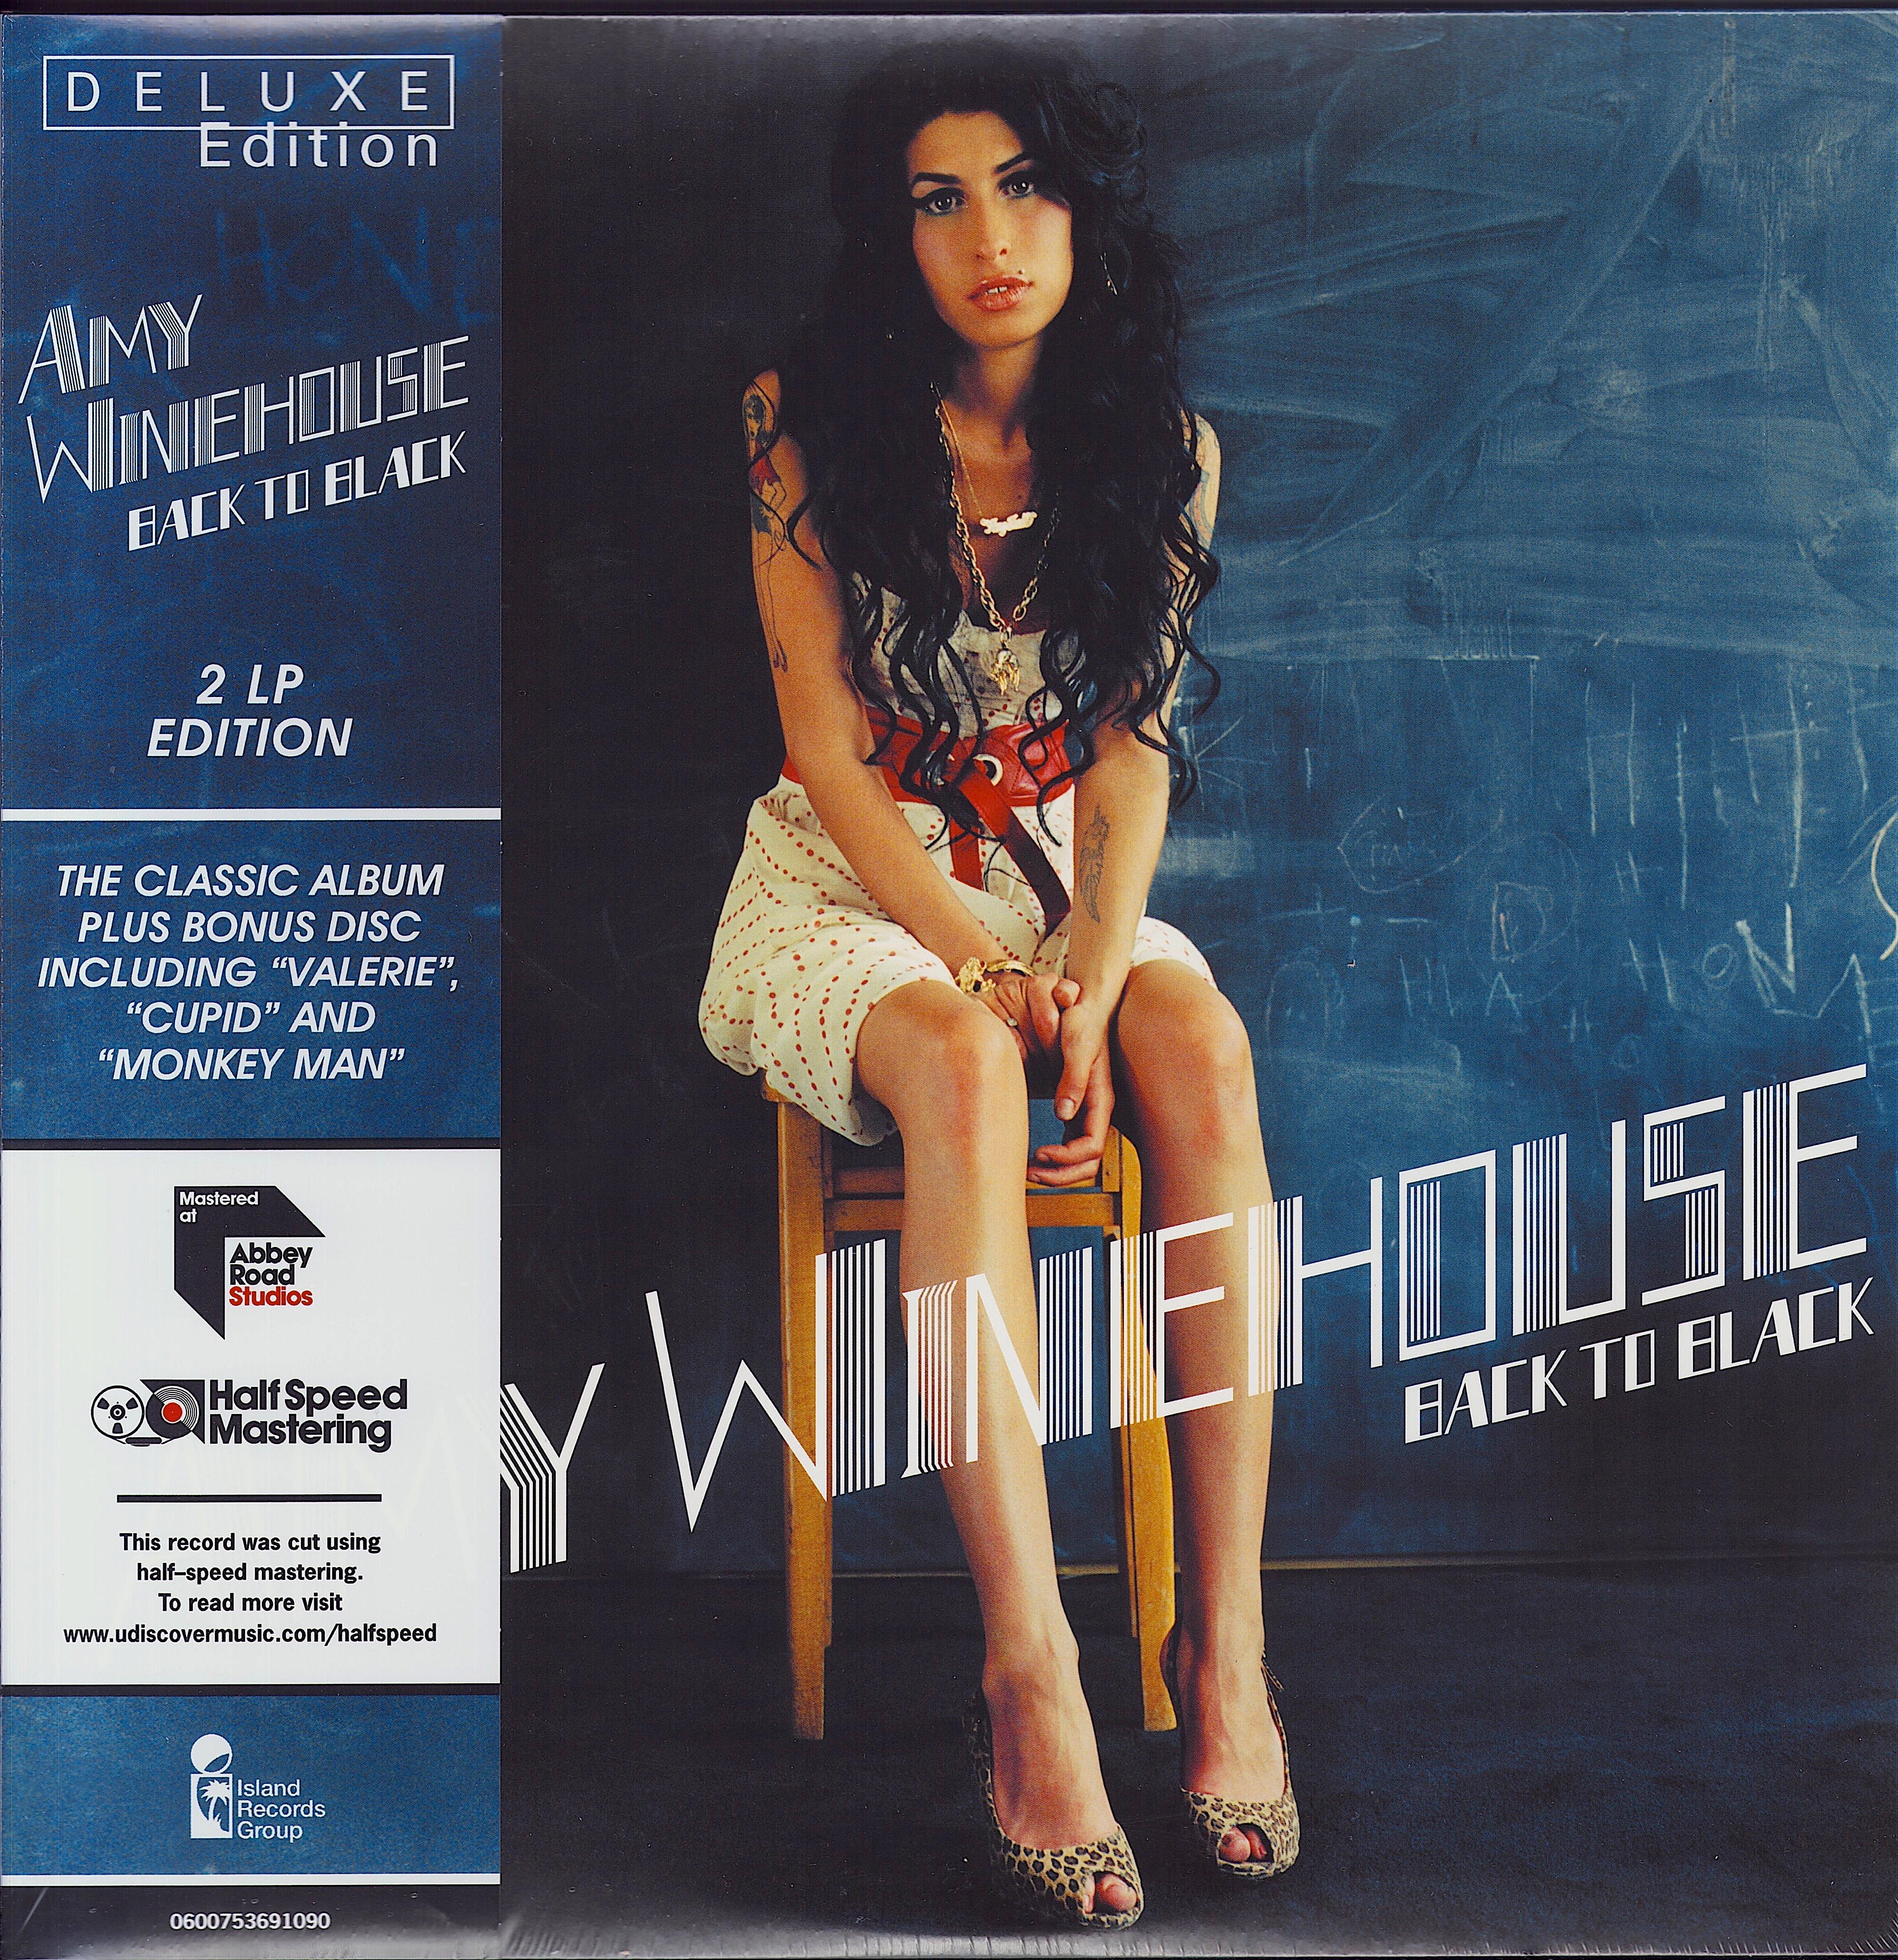 Amy Winehouse - Back To Black - Half-Speed Mastering Deluxe Edition (Vinyl  LP)